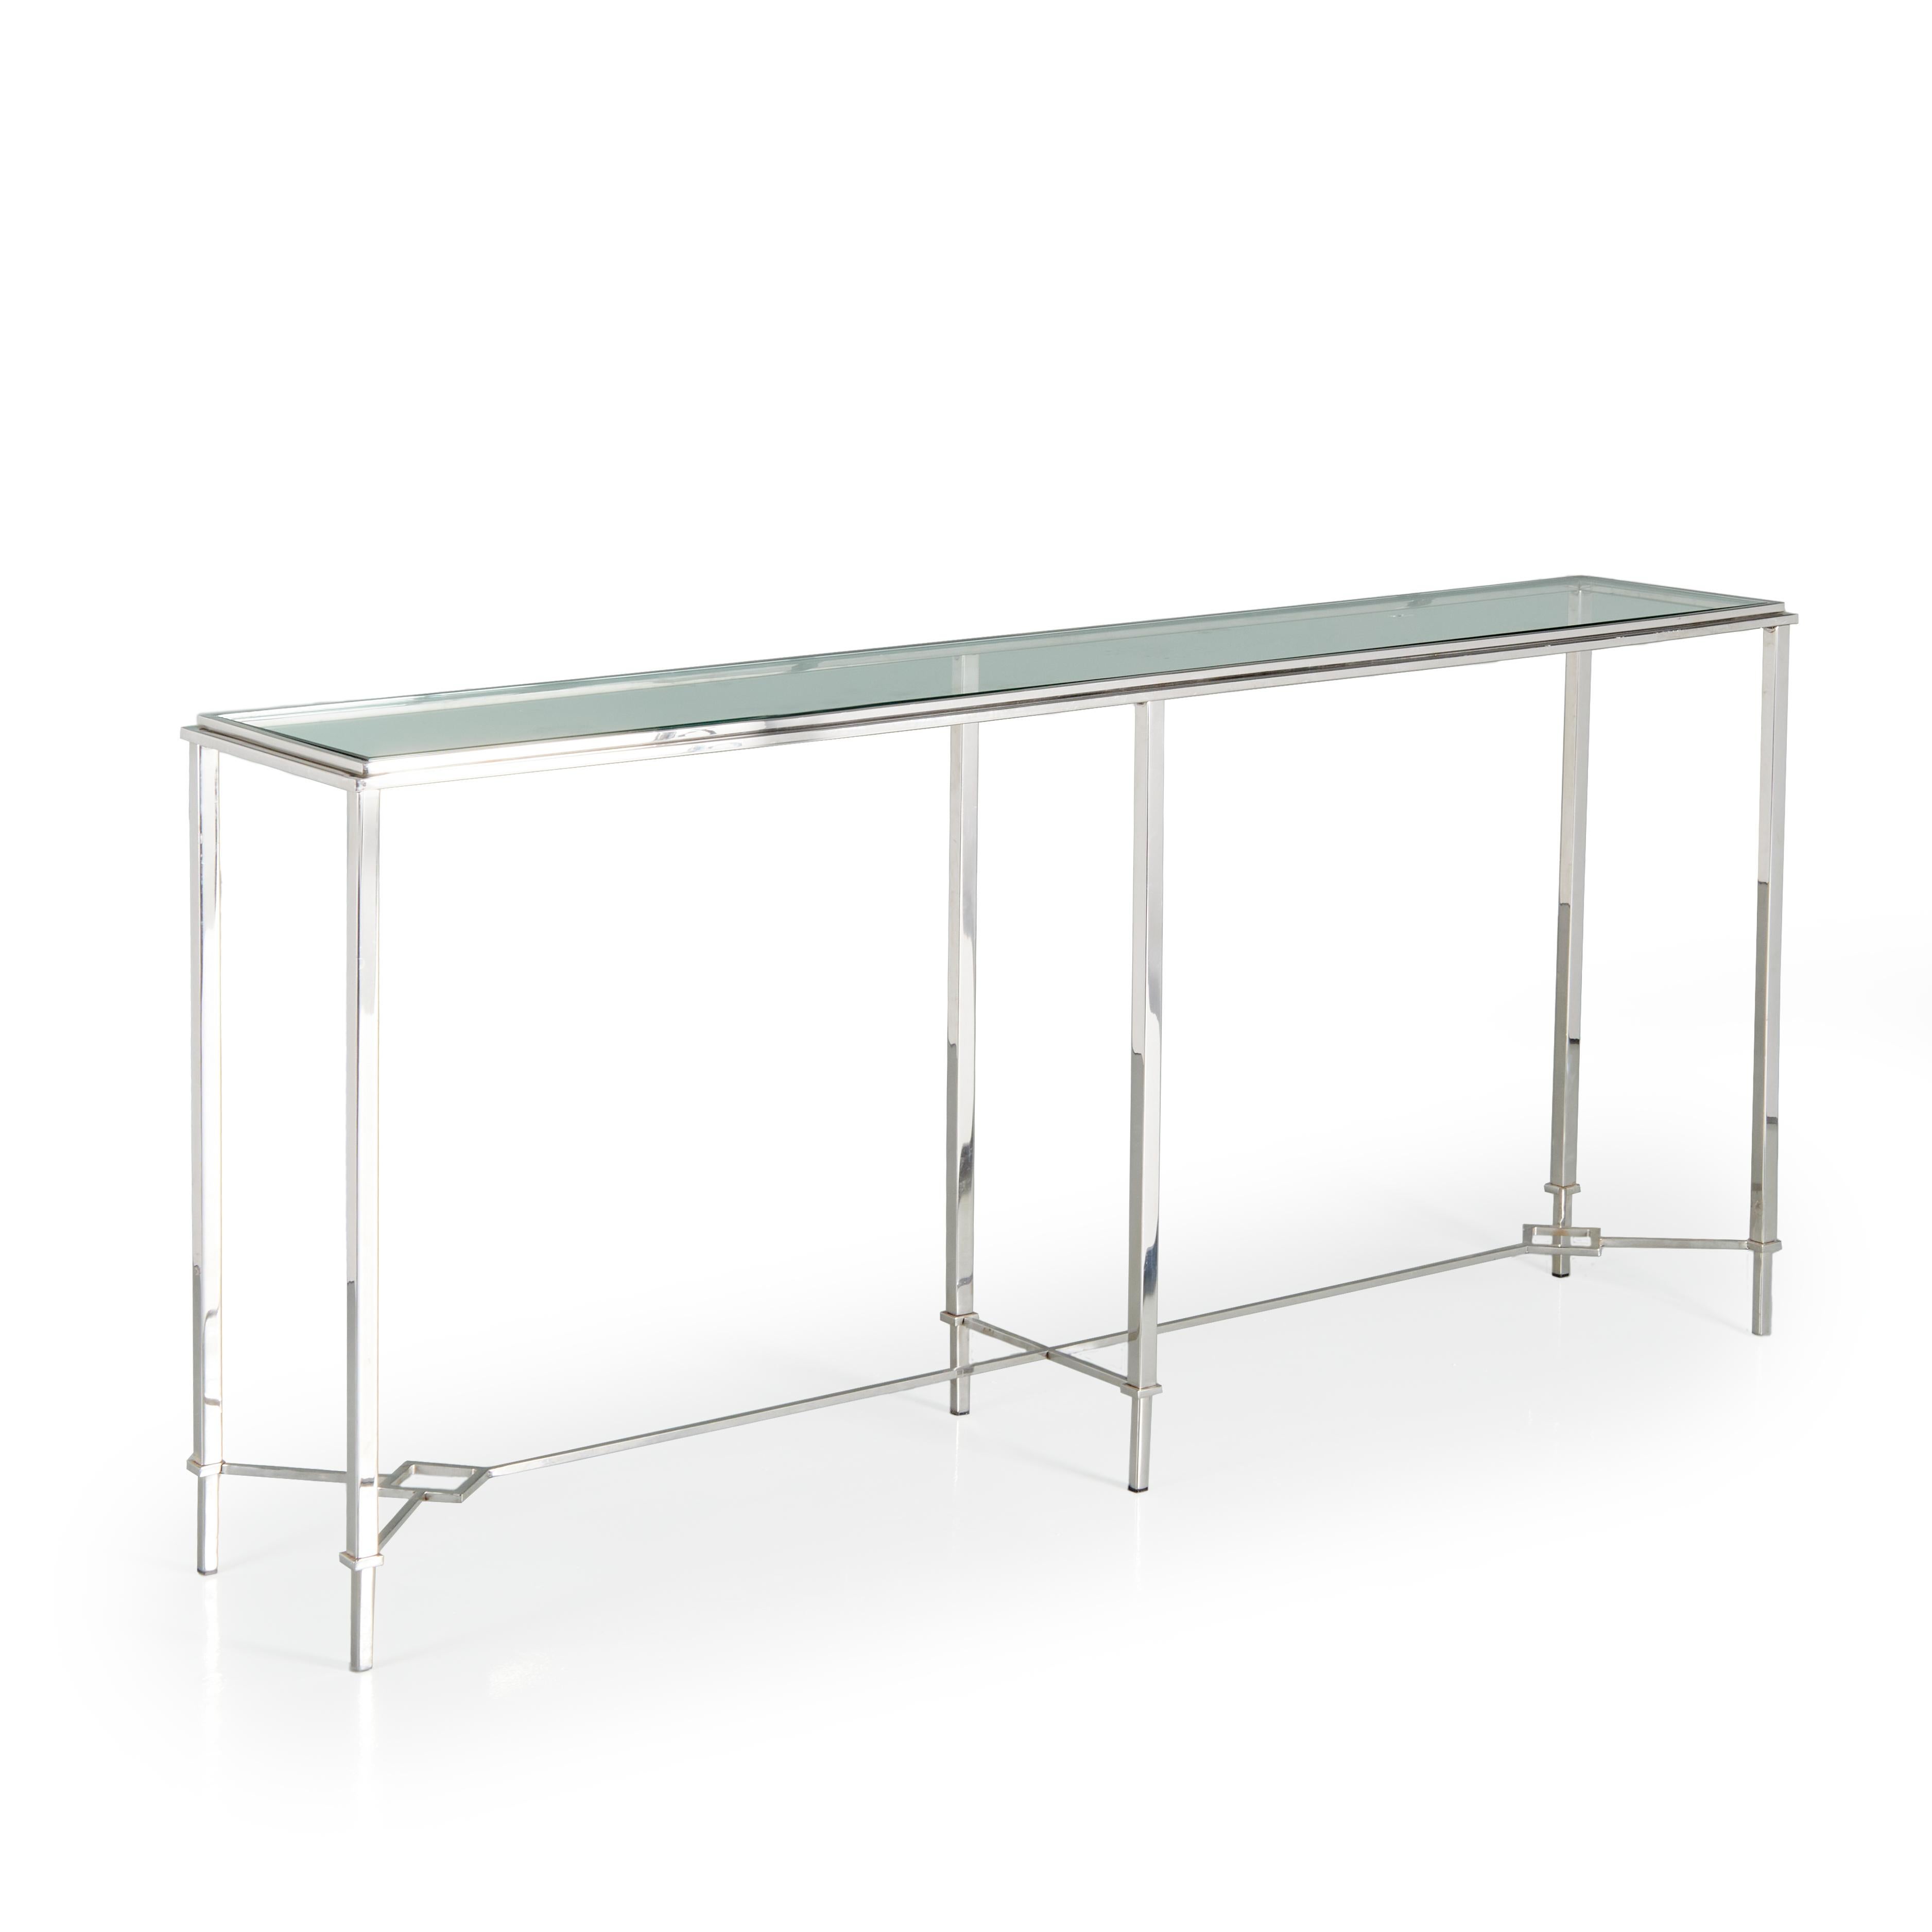 Elegant streamlined console table with polished chrome square tube metal frame and thick green plate glass top. High quality construction with polished welds, and tapering legs joined by stretcher set with diamond shaped connectors. 

Attributed to